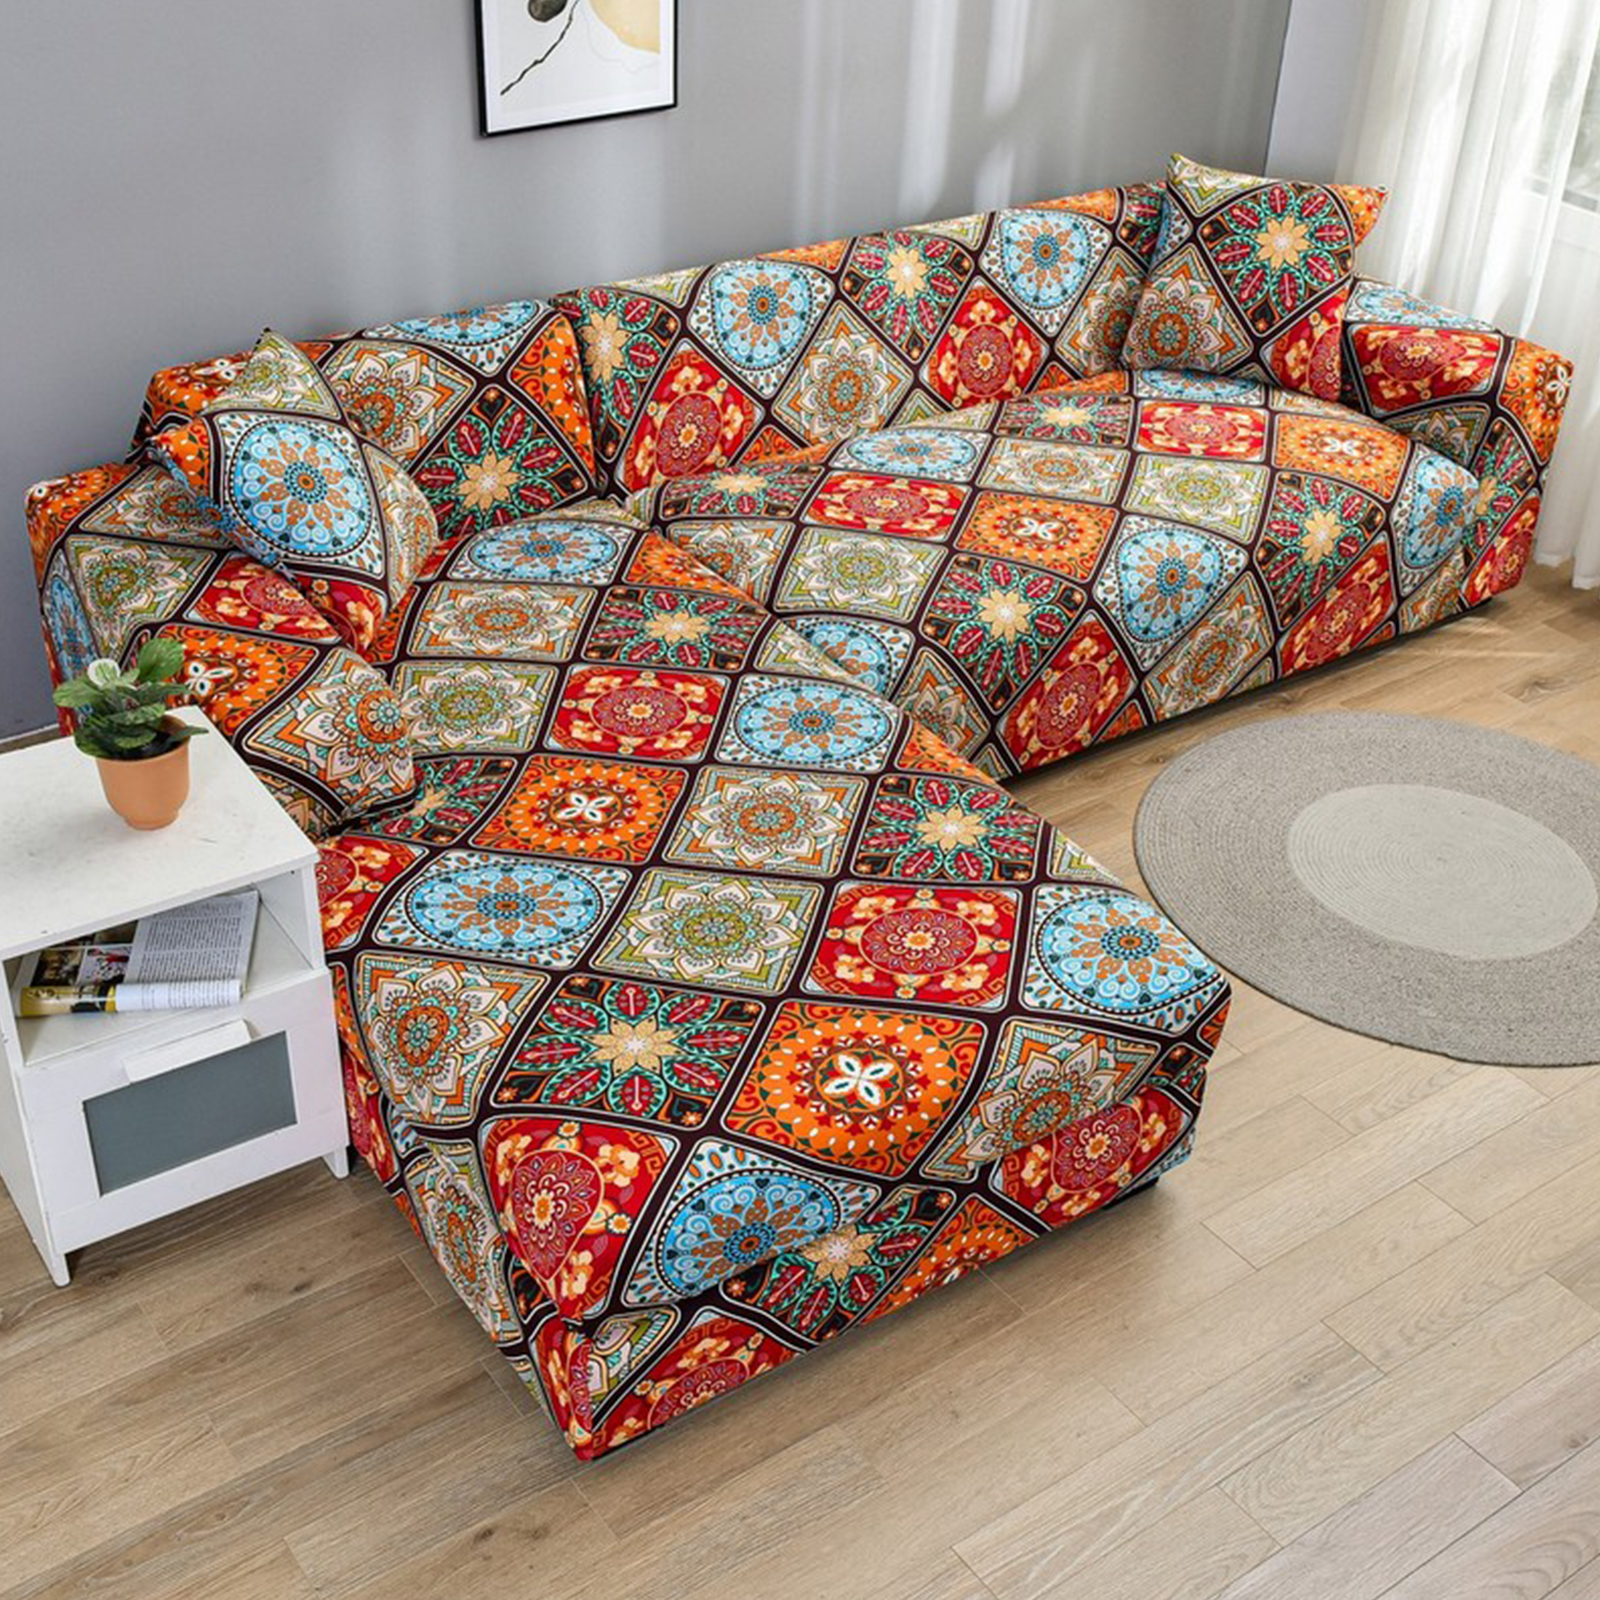 2-Piece L-Shaped Soft Stretch Printed Sofa Set For Three Persons, Washable For All Seasons, with 2 Pillowcases